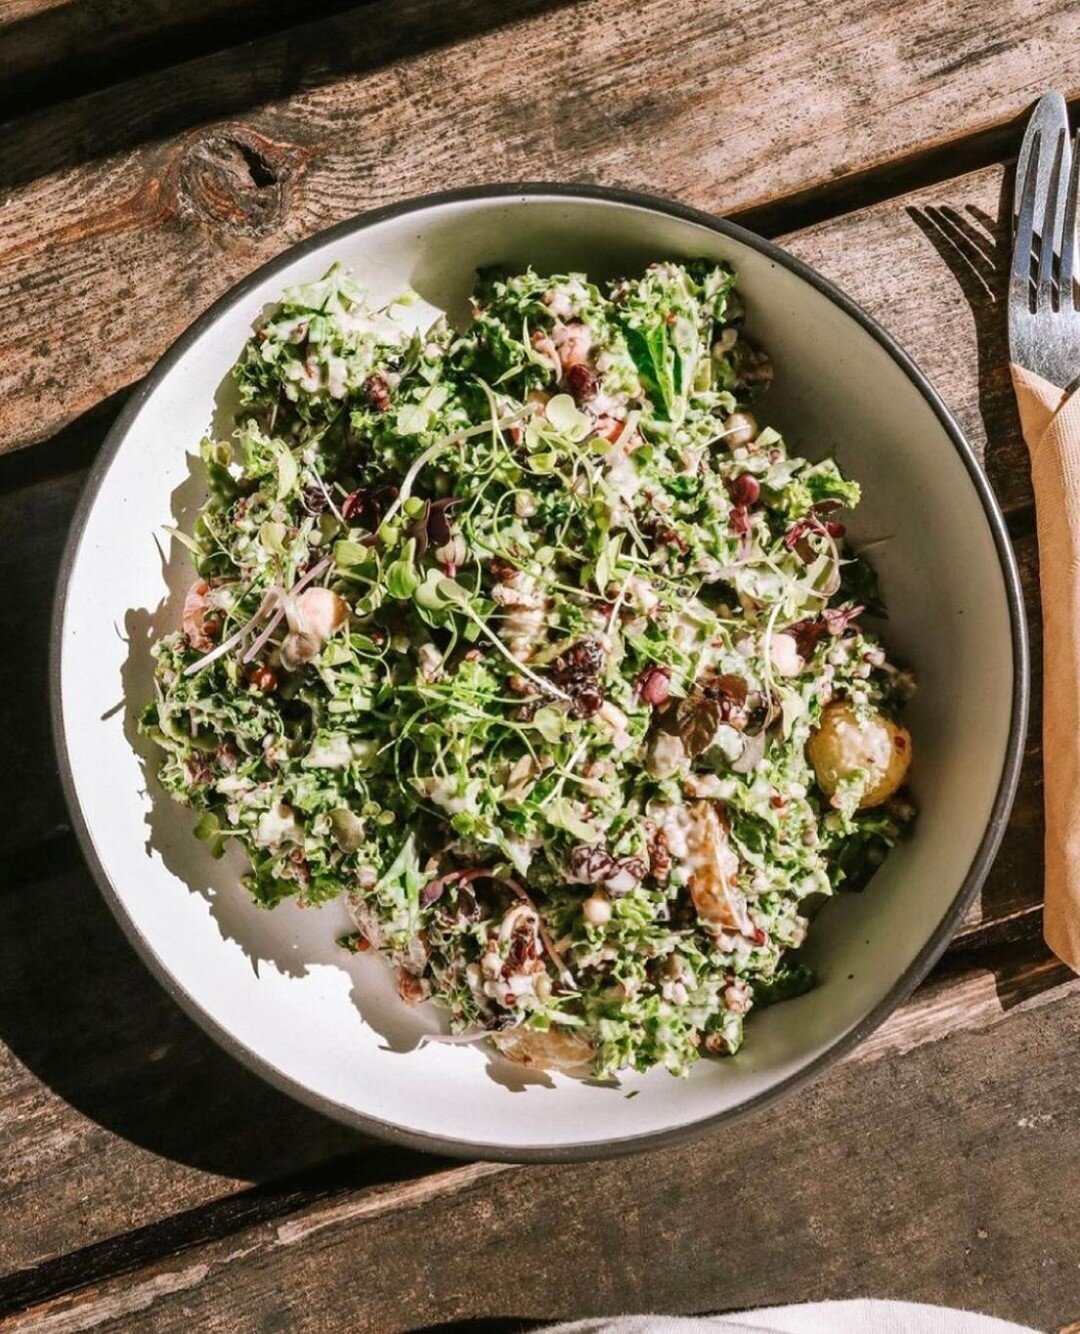 Long Friday lunches in the sun @stable_coffee_kitchen, featuring one of their delicious daily salads. Photo @amandaducks